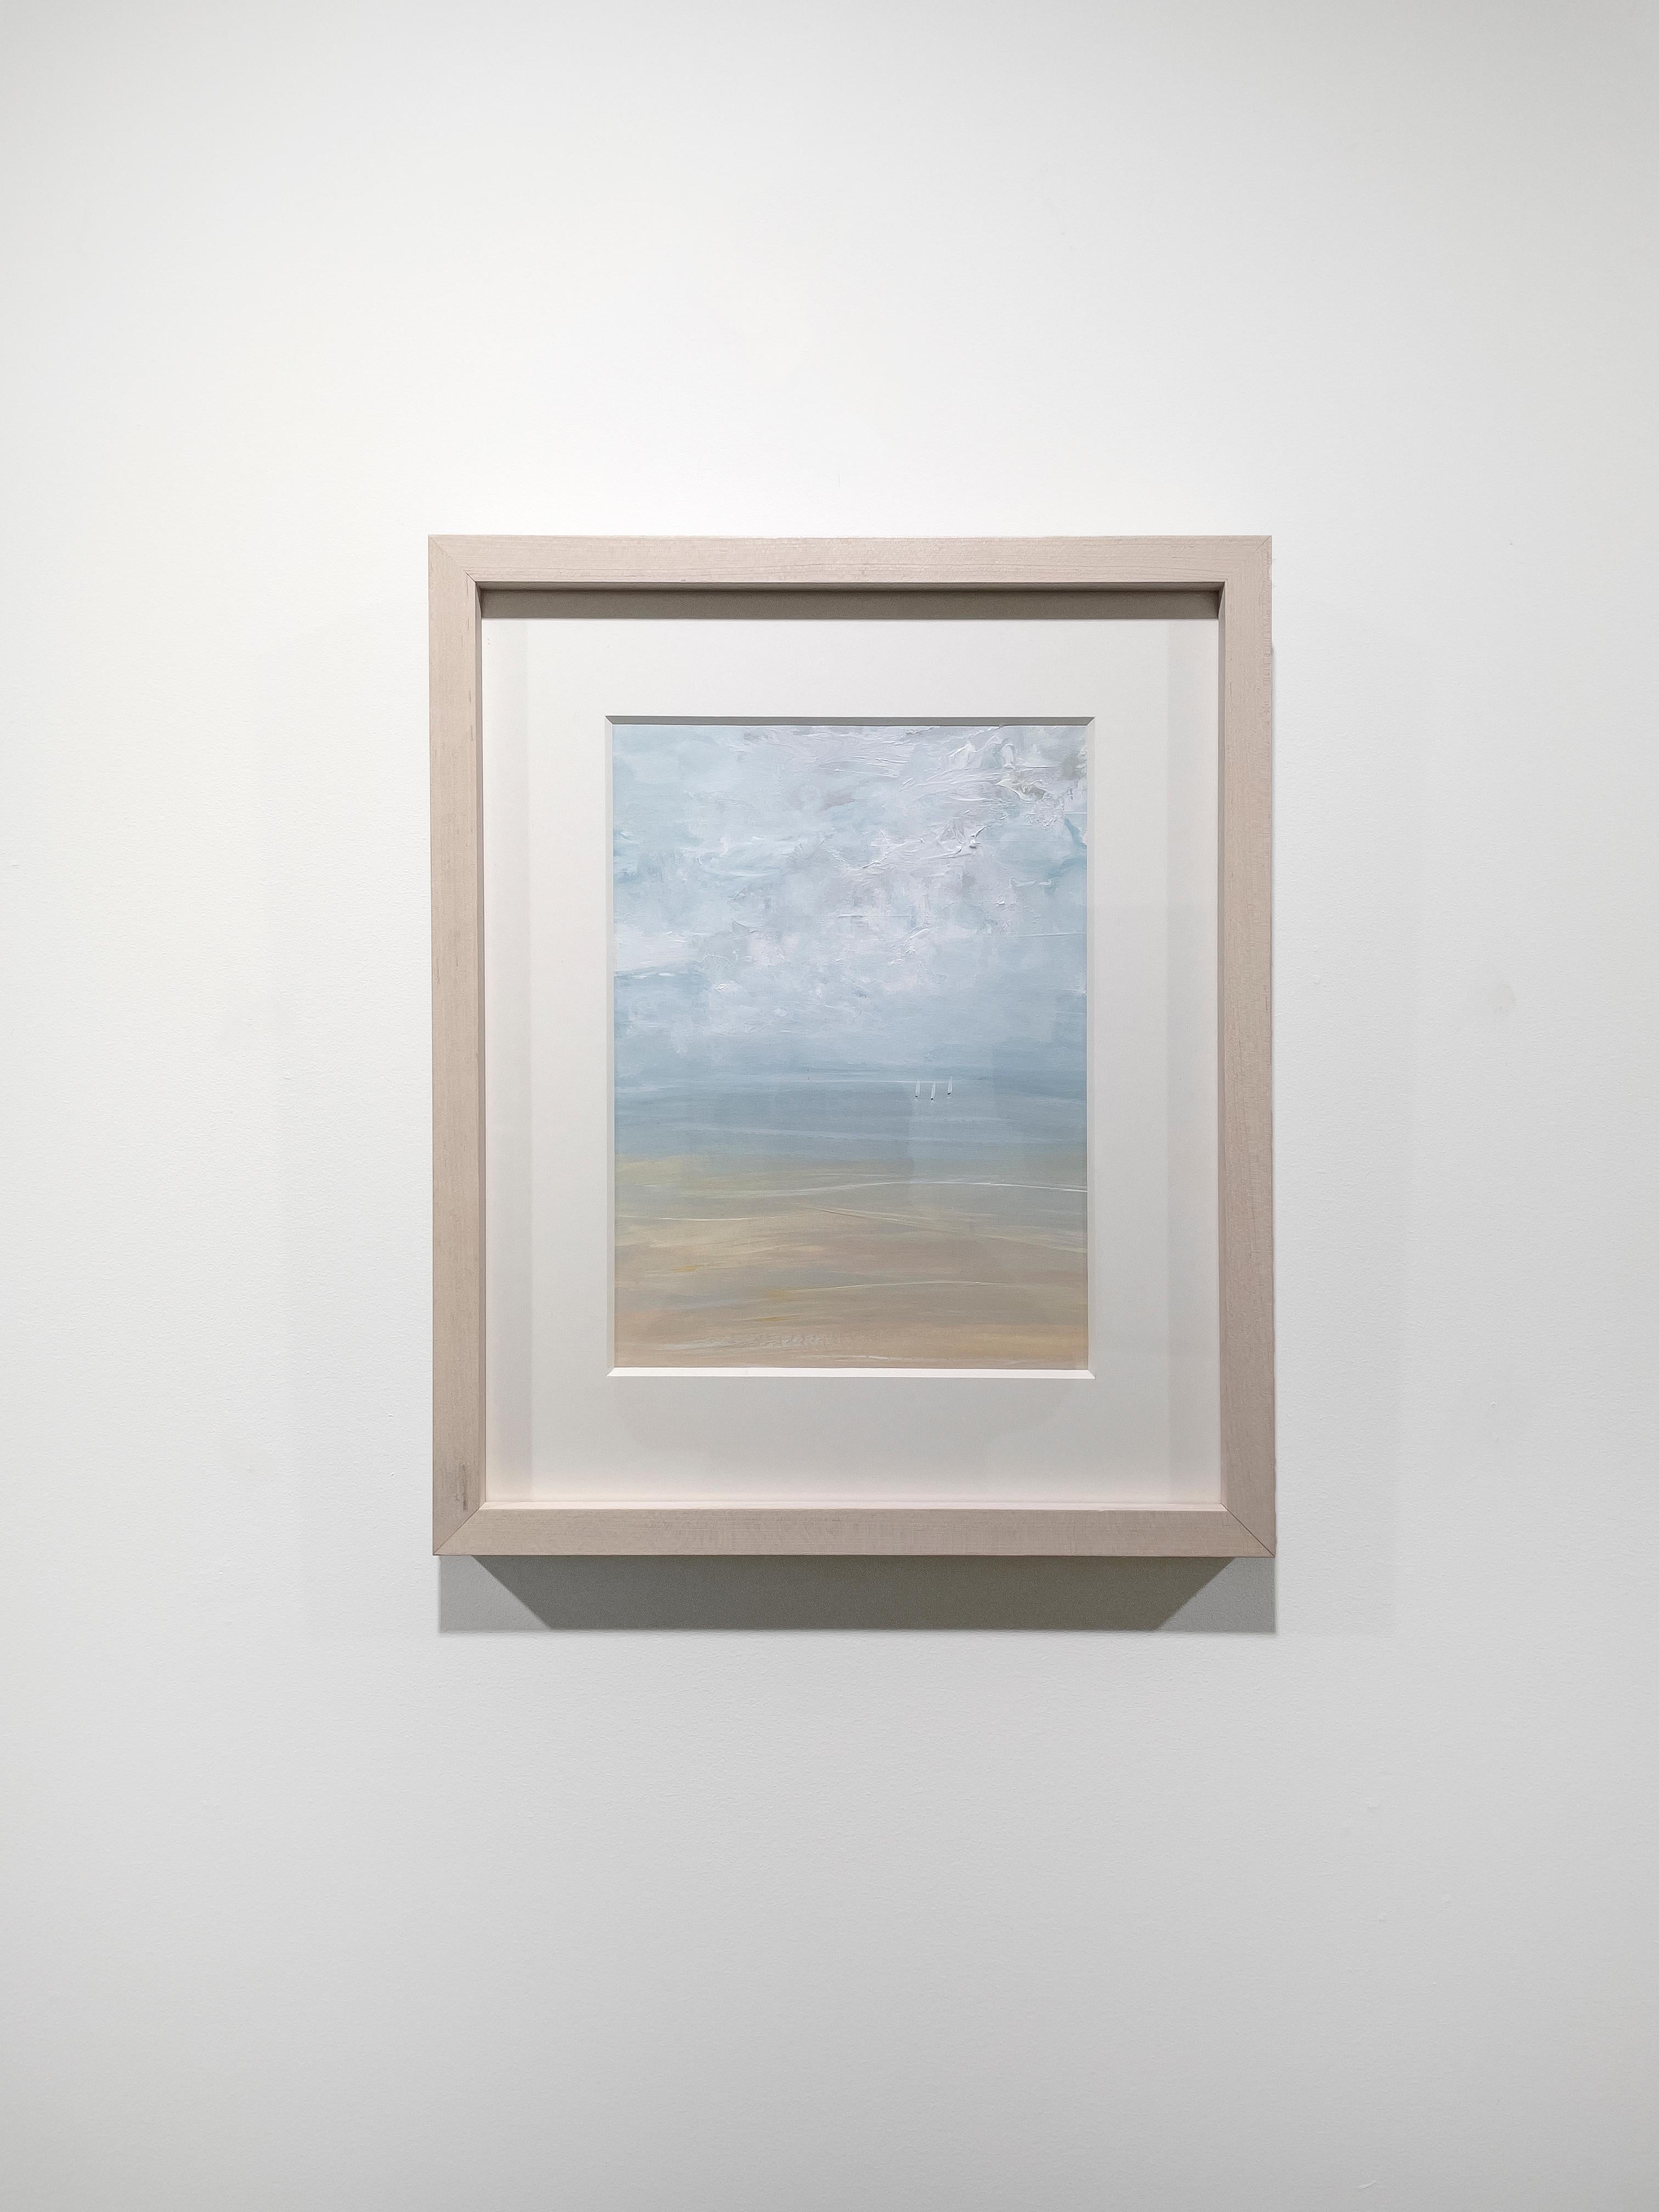 This contemporary seascape painting by S.C. Aldo is made with acrylic paint on Arches paper. It has a vertical format, and features a coastal scene with a light blue sky, textured abstract clouds and three small sailboats along the horizon. The